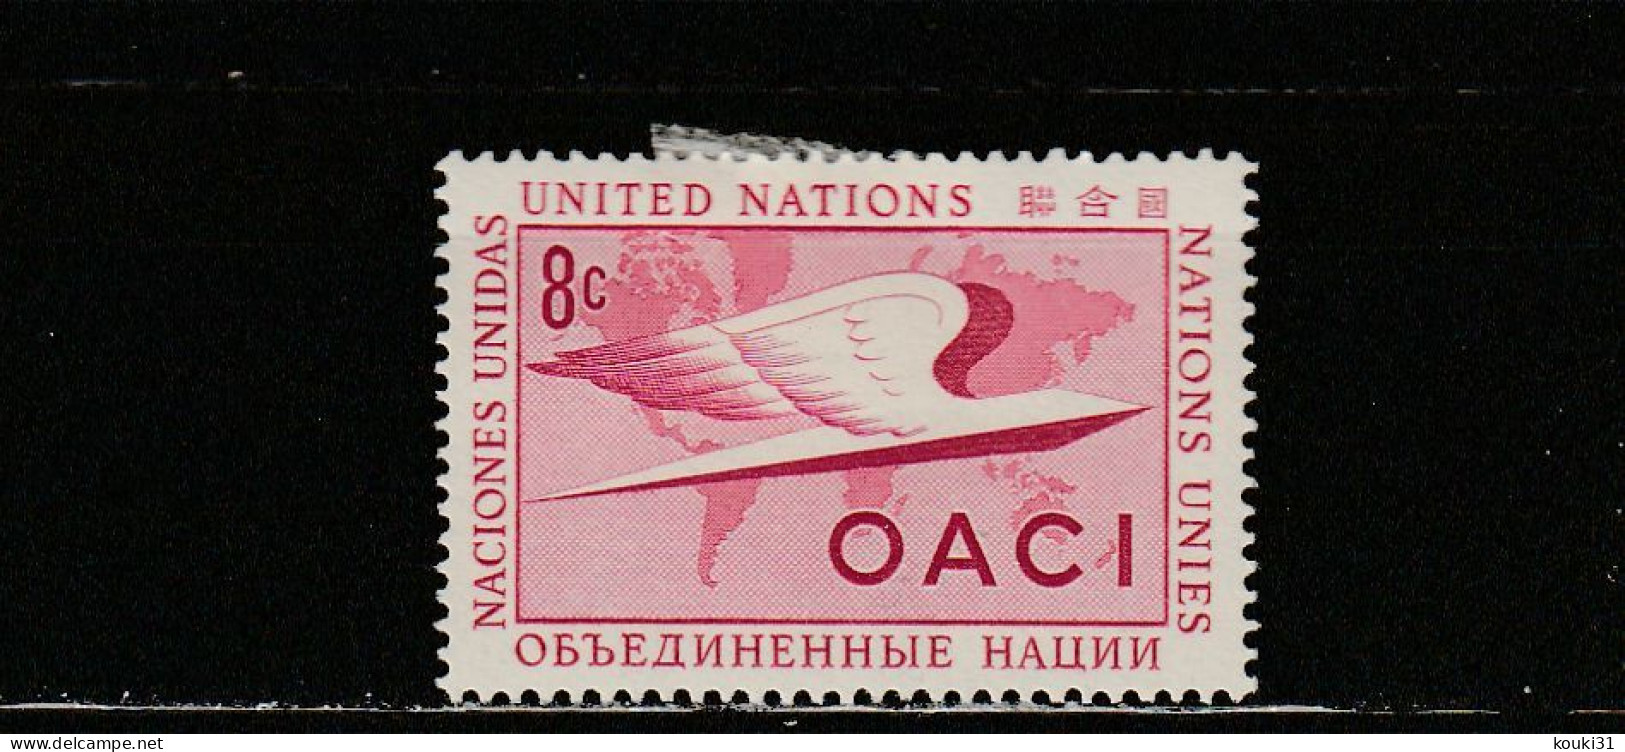 Nations Unies (New-York) YT 32 * : OACI - 1955 - Unused Stamps